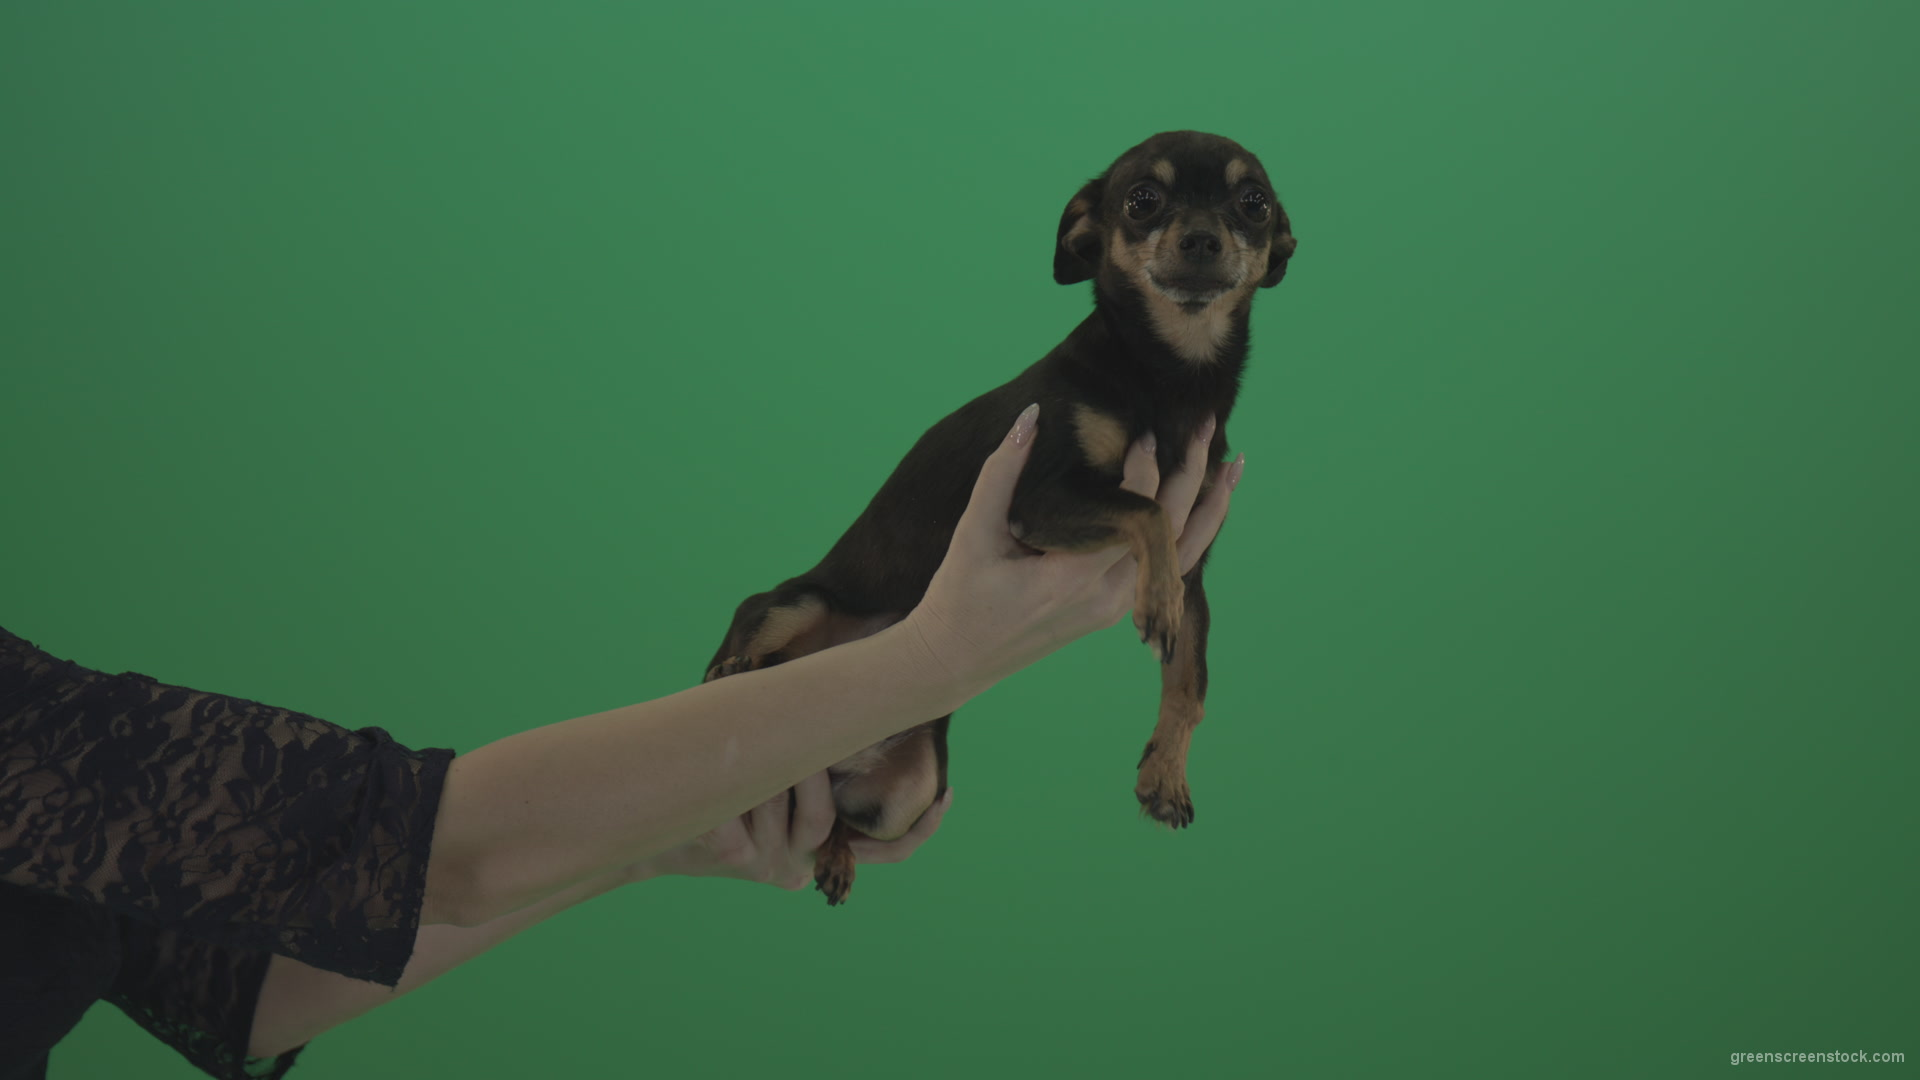 Black-funny-Chihuahua-small-dog-in-female-hands-on-green-screen_001 Green Screen Stock